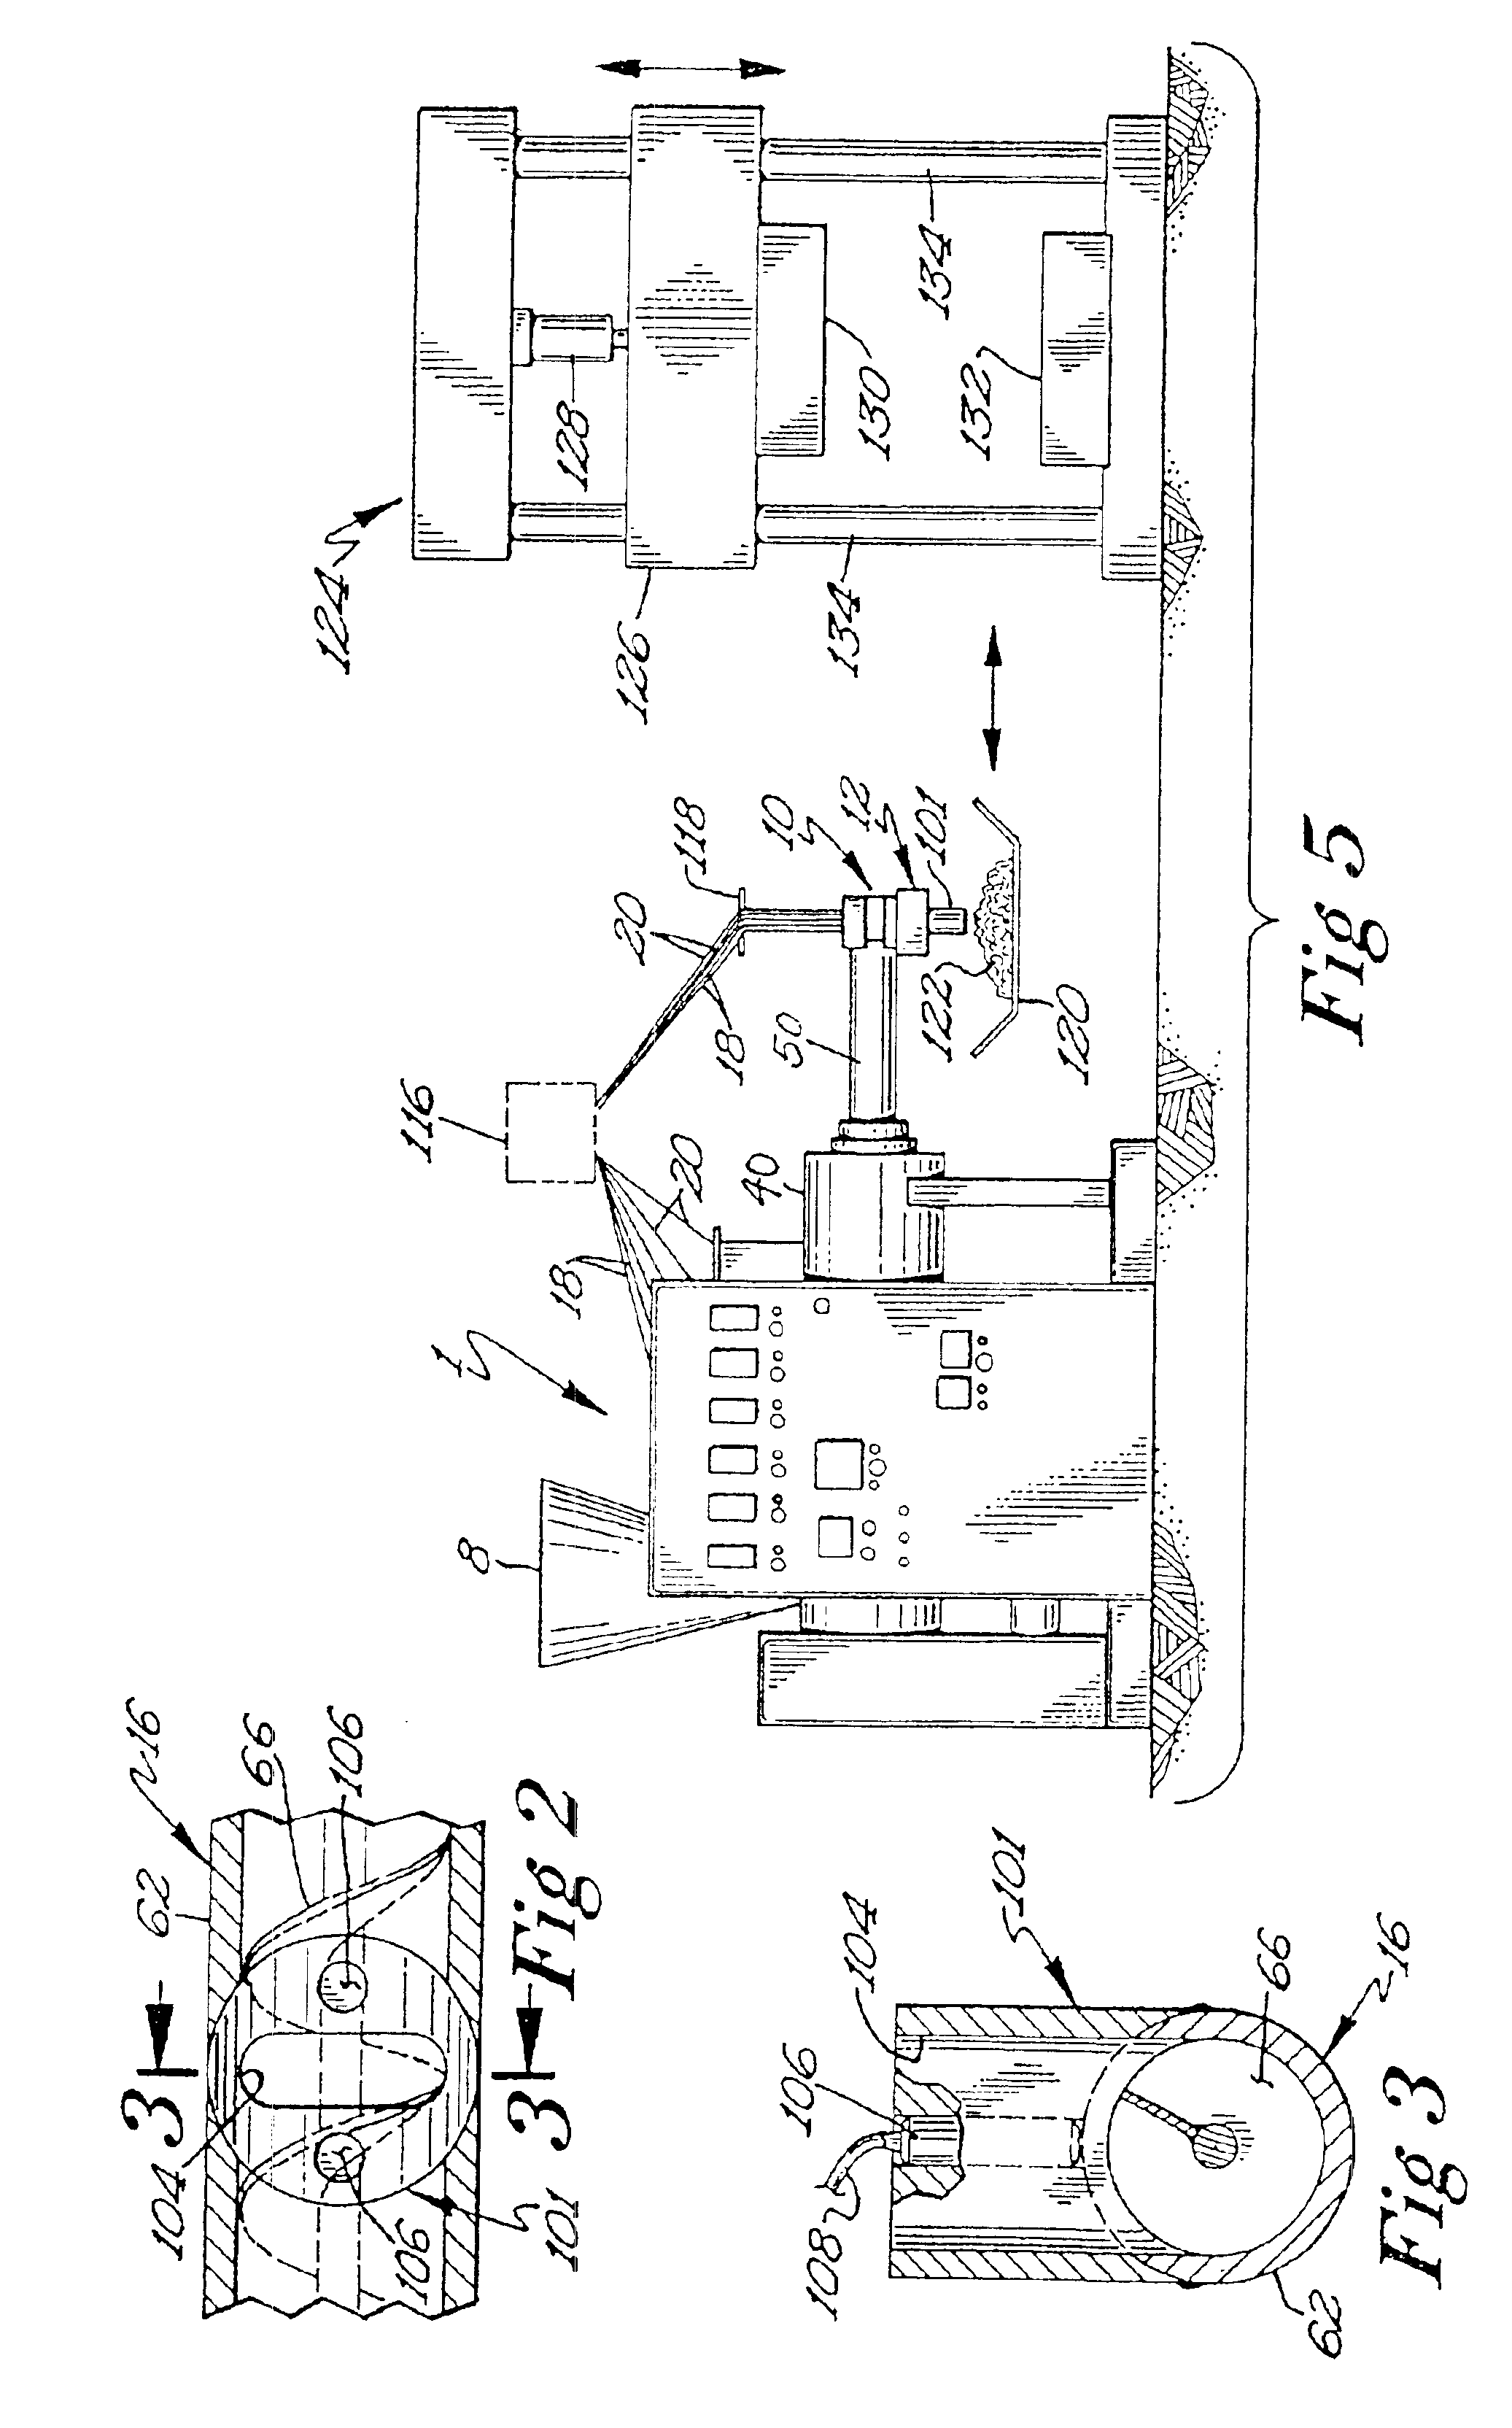 Method of compounding resin and fiber